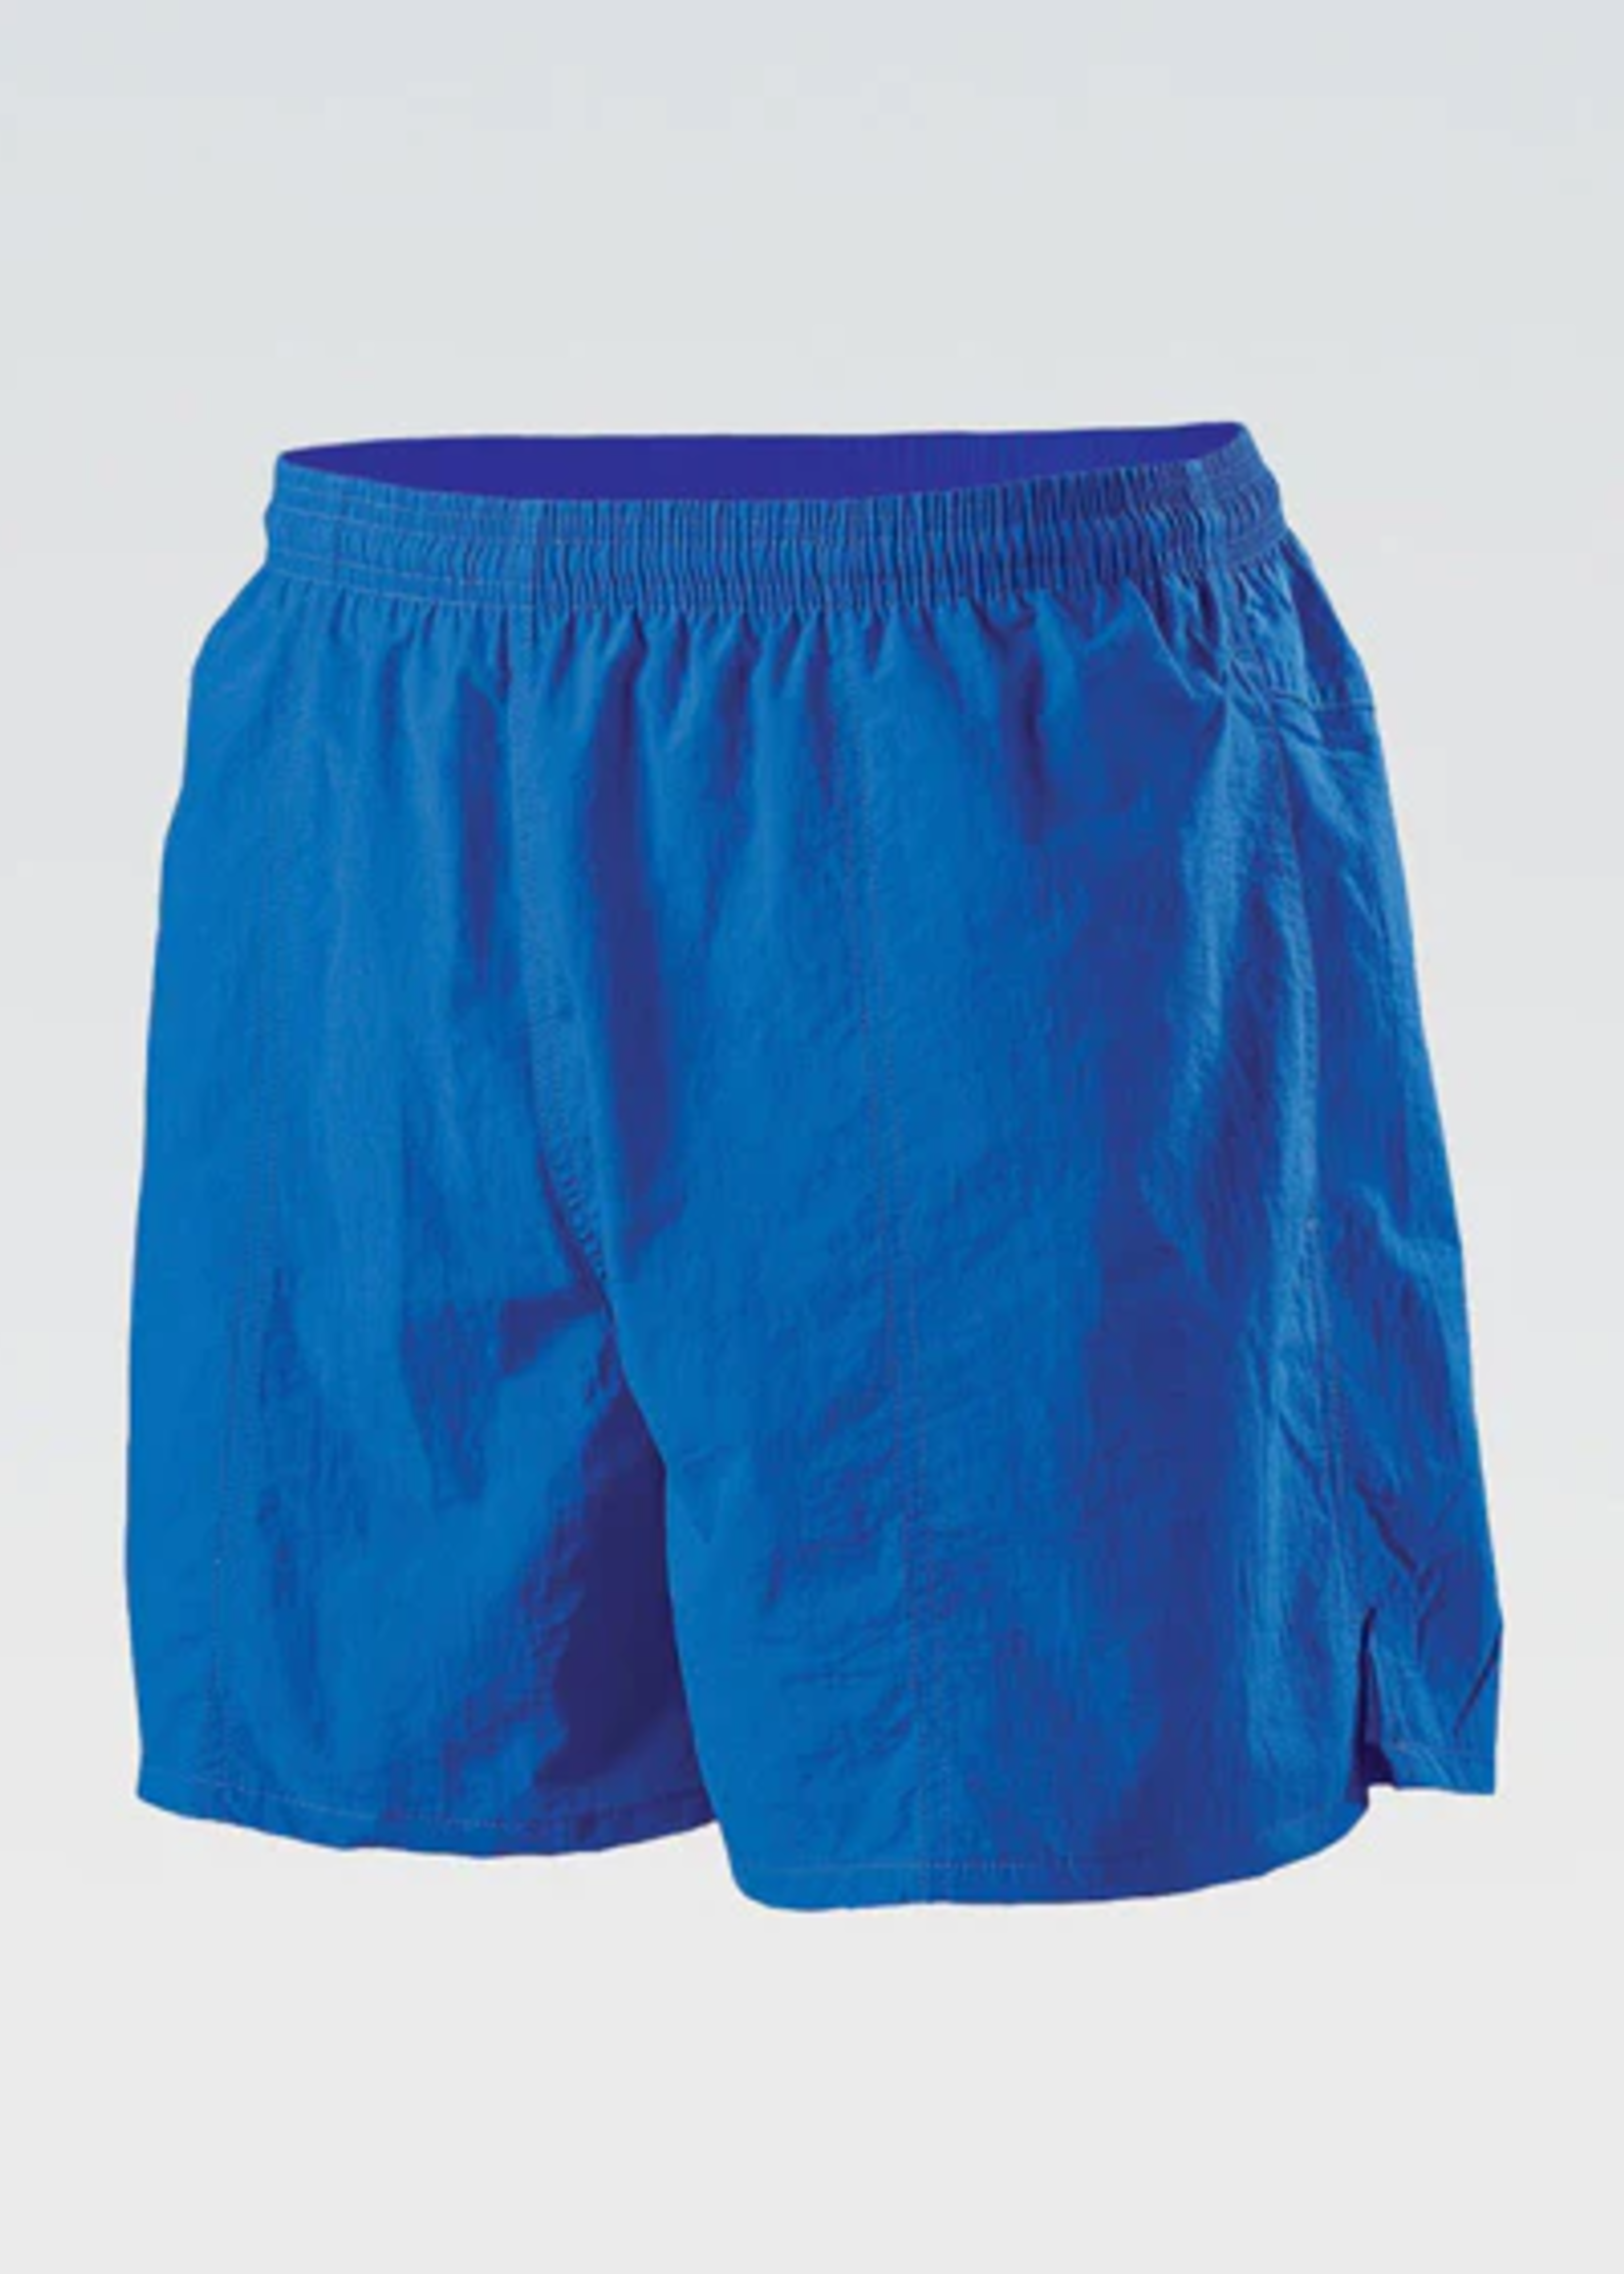 Solid 5 Inch Water Short 475 Royal